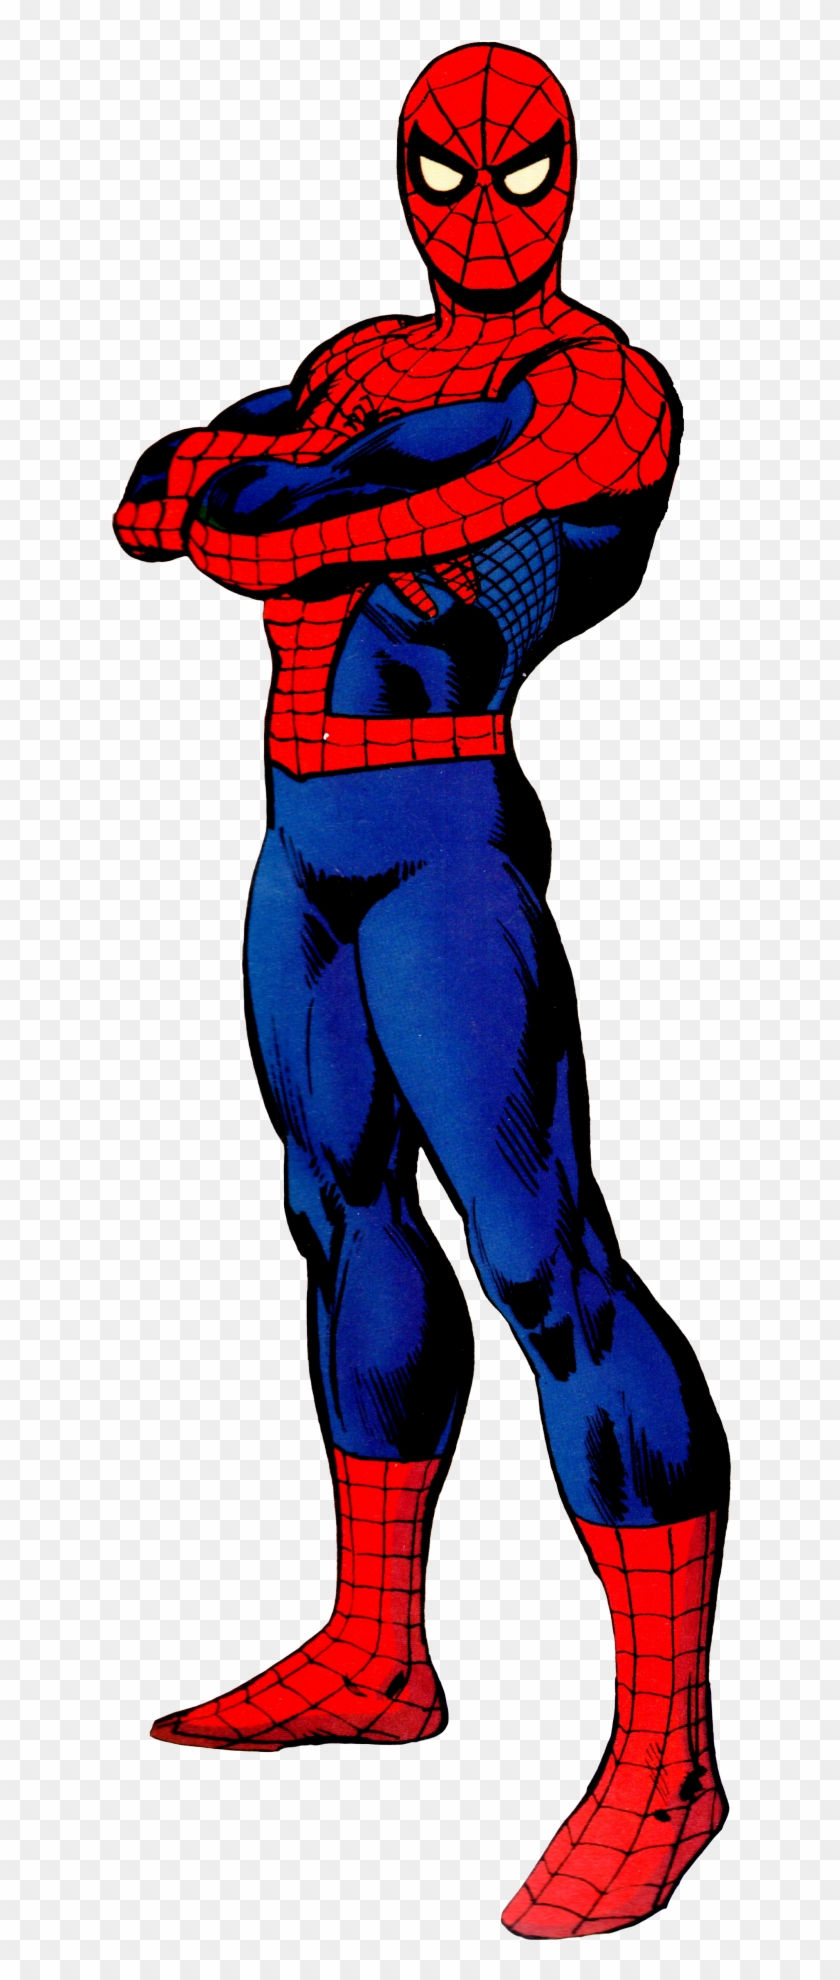 The Amazing Spider-man By Ross Andru & Dick Giordano - Hombre Araña Cuerpo  Completo, HD Png Download - 967x1920(#4076406) - PngFind